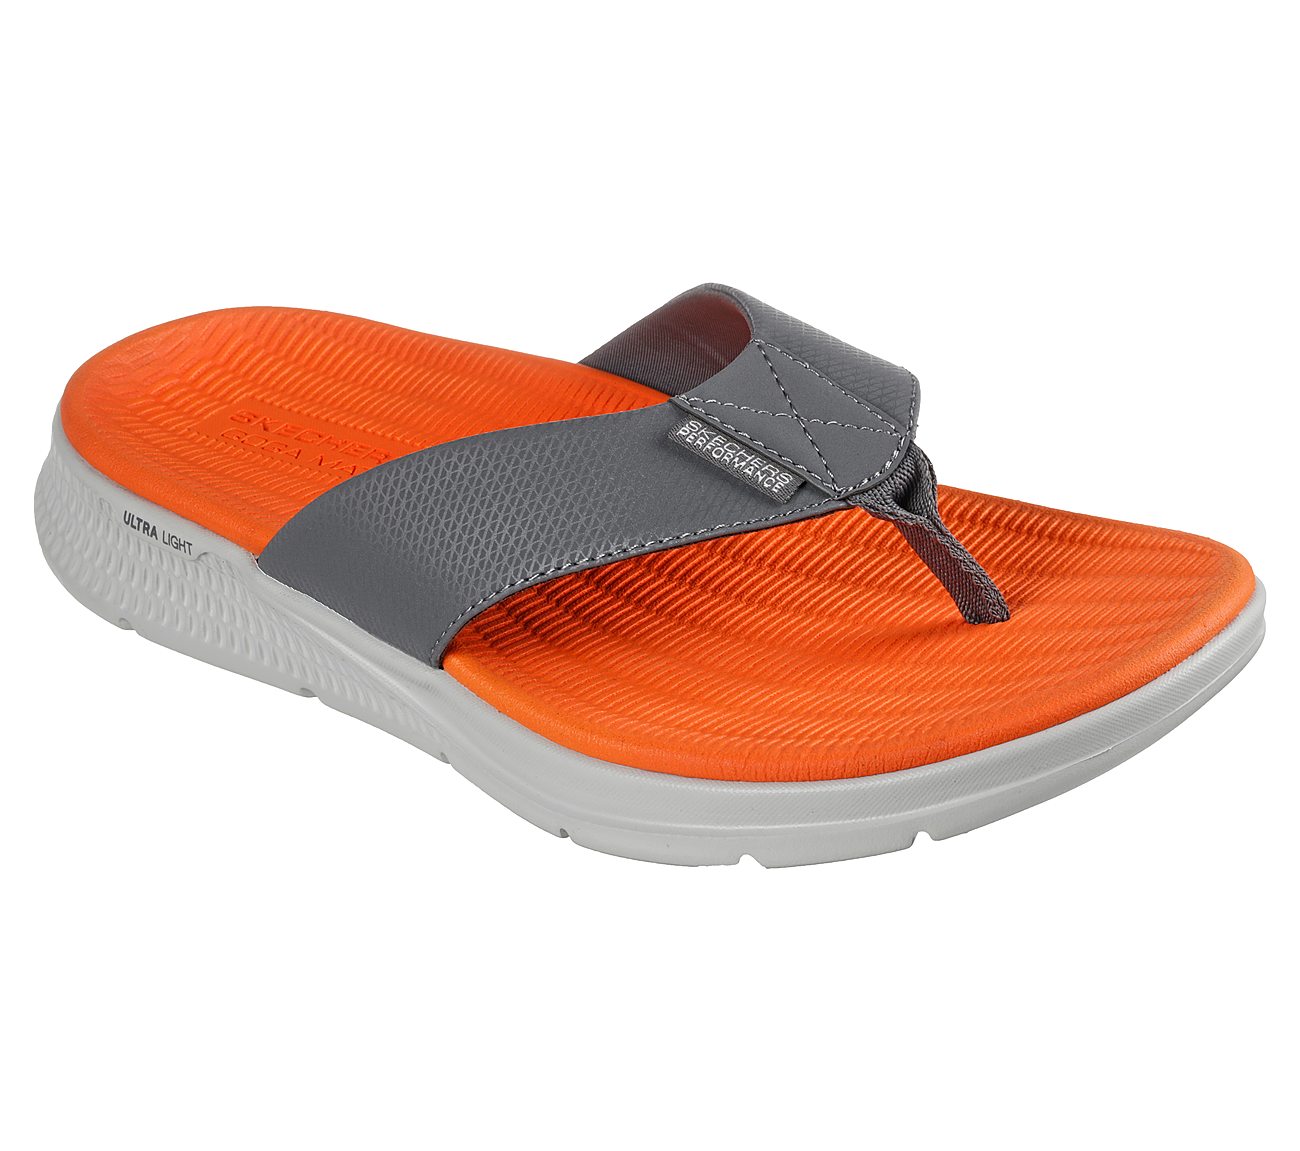 GO CONSISTENT SANDAL-SYNTHWAV, GREY/ORANGE Footwear Lateral View